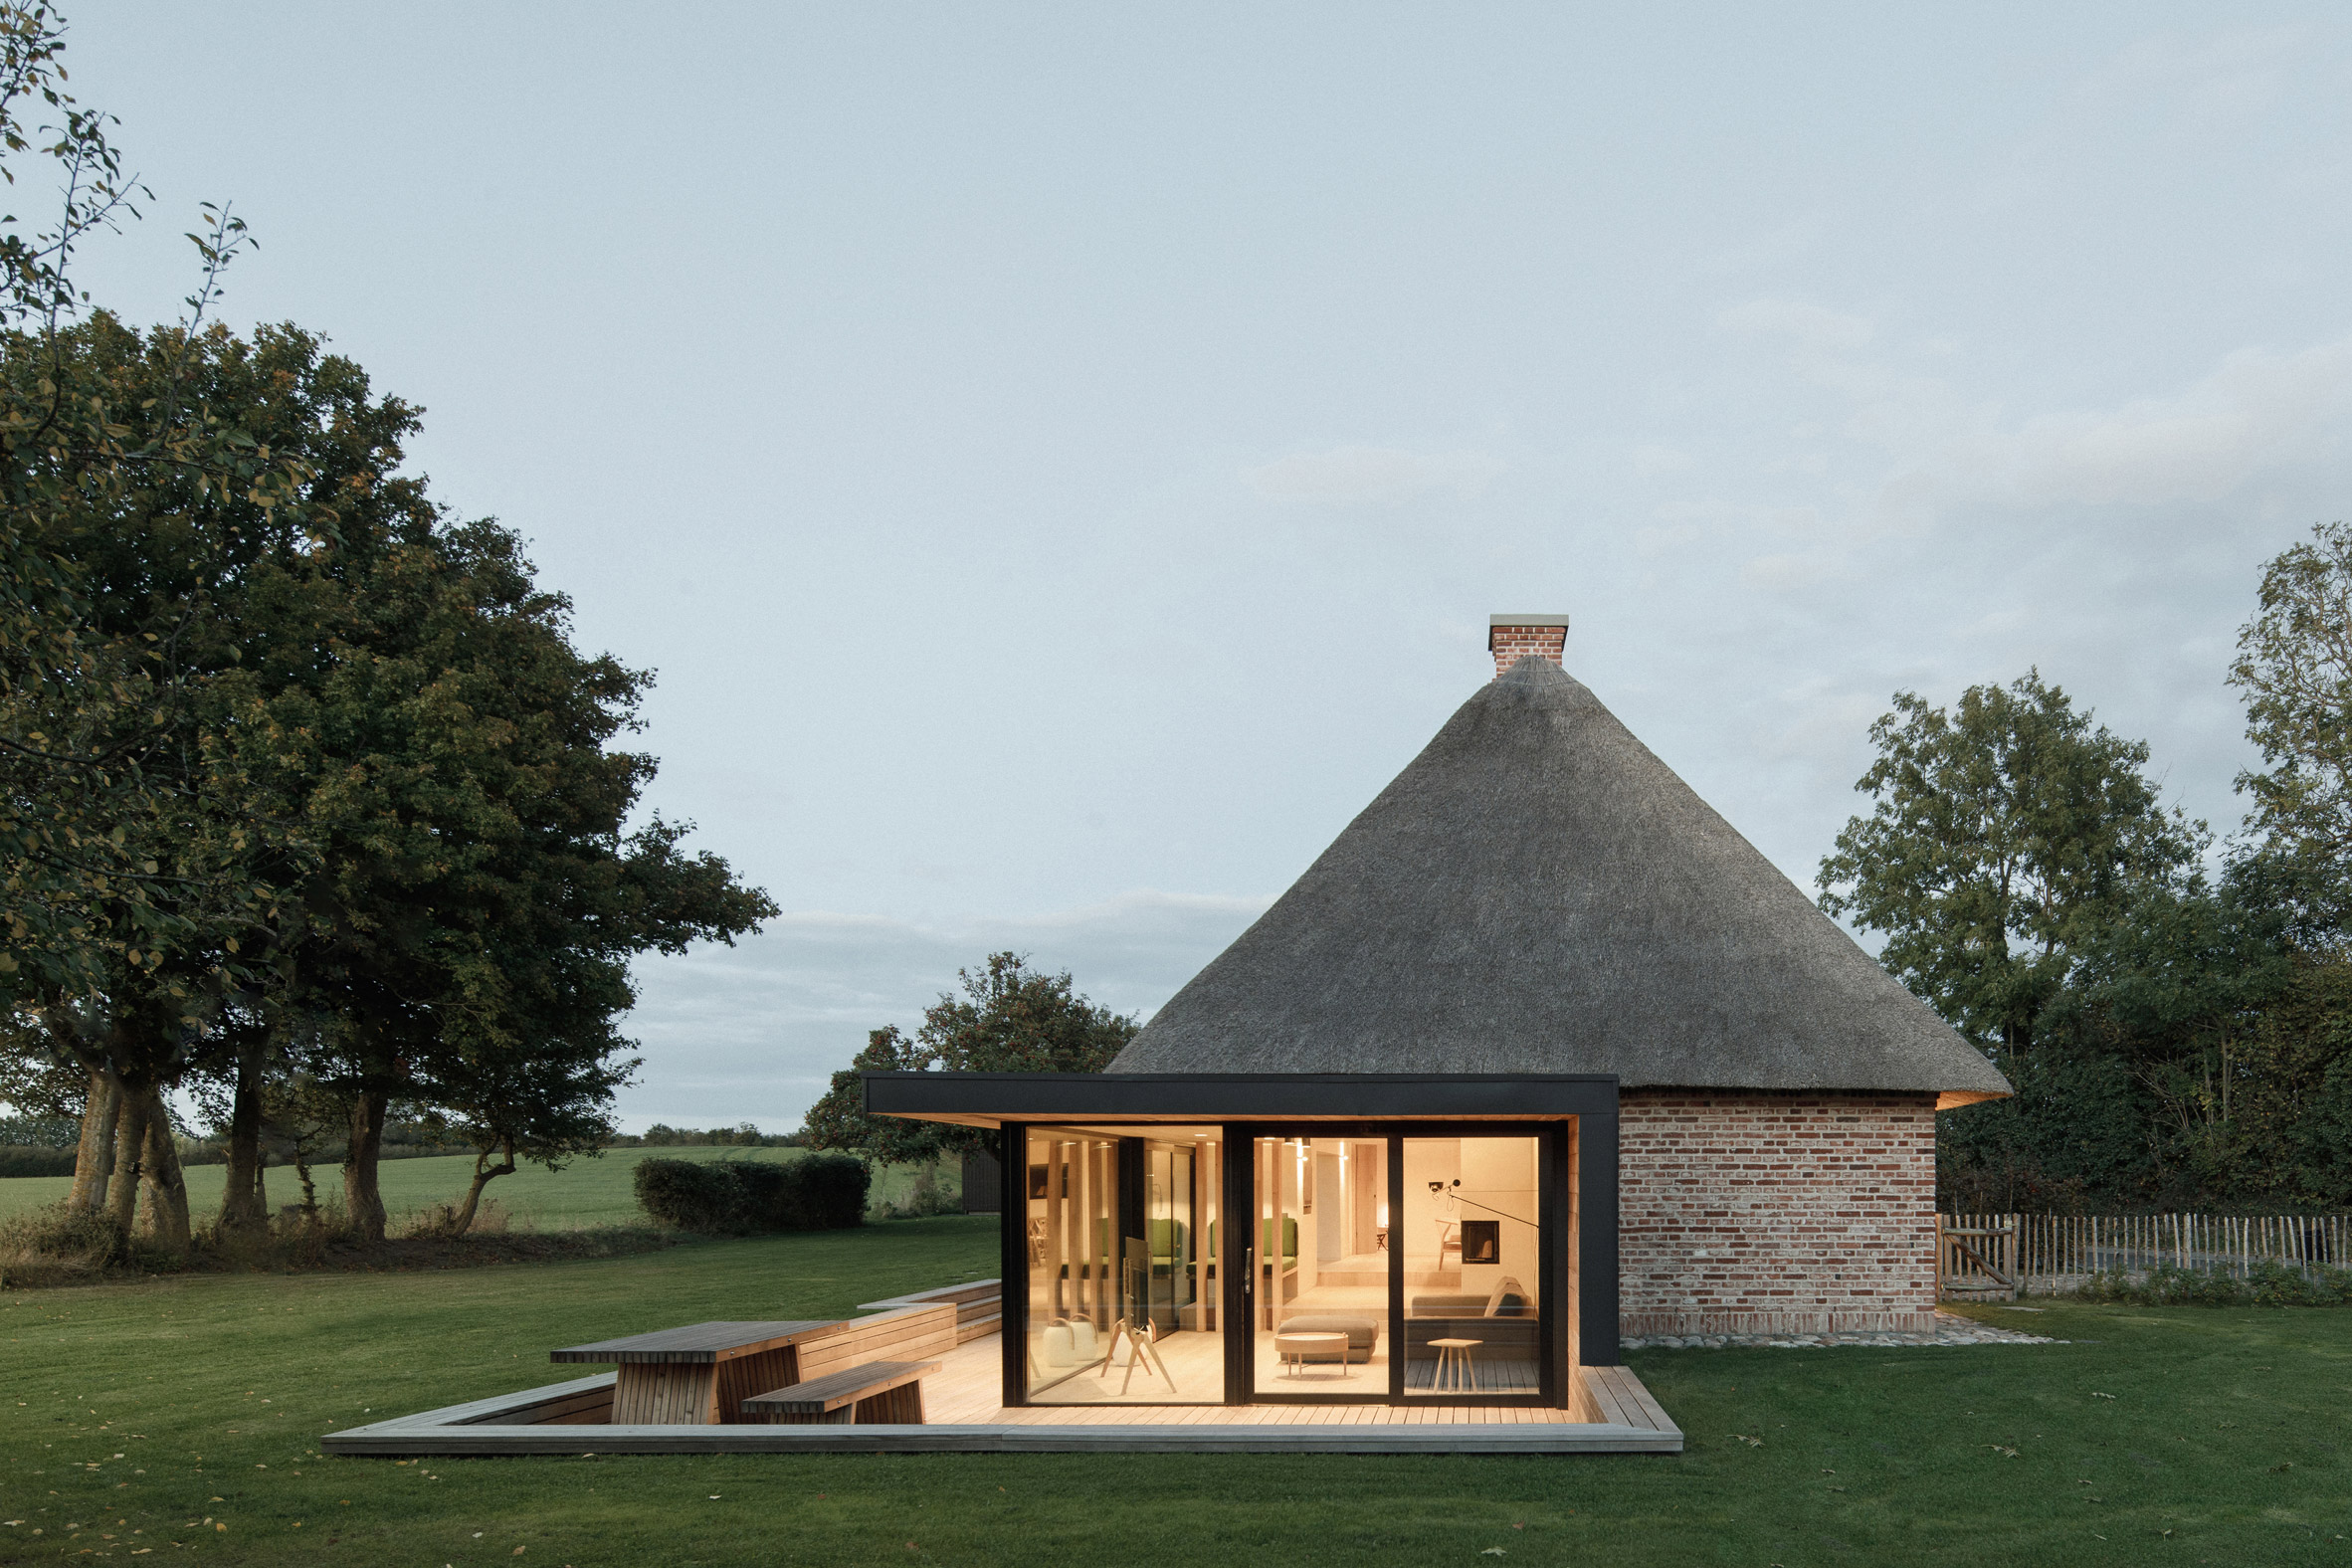 Thatched roof and glazed extension of Nieby Crofters Cottage by Jan Henrik Jansen and Marshall Blecher